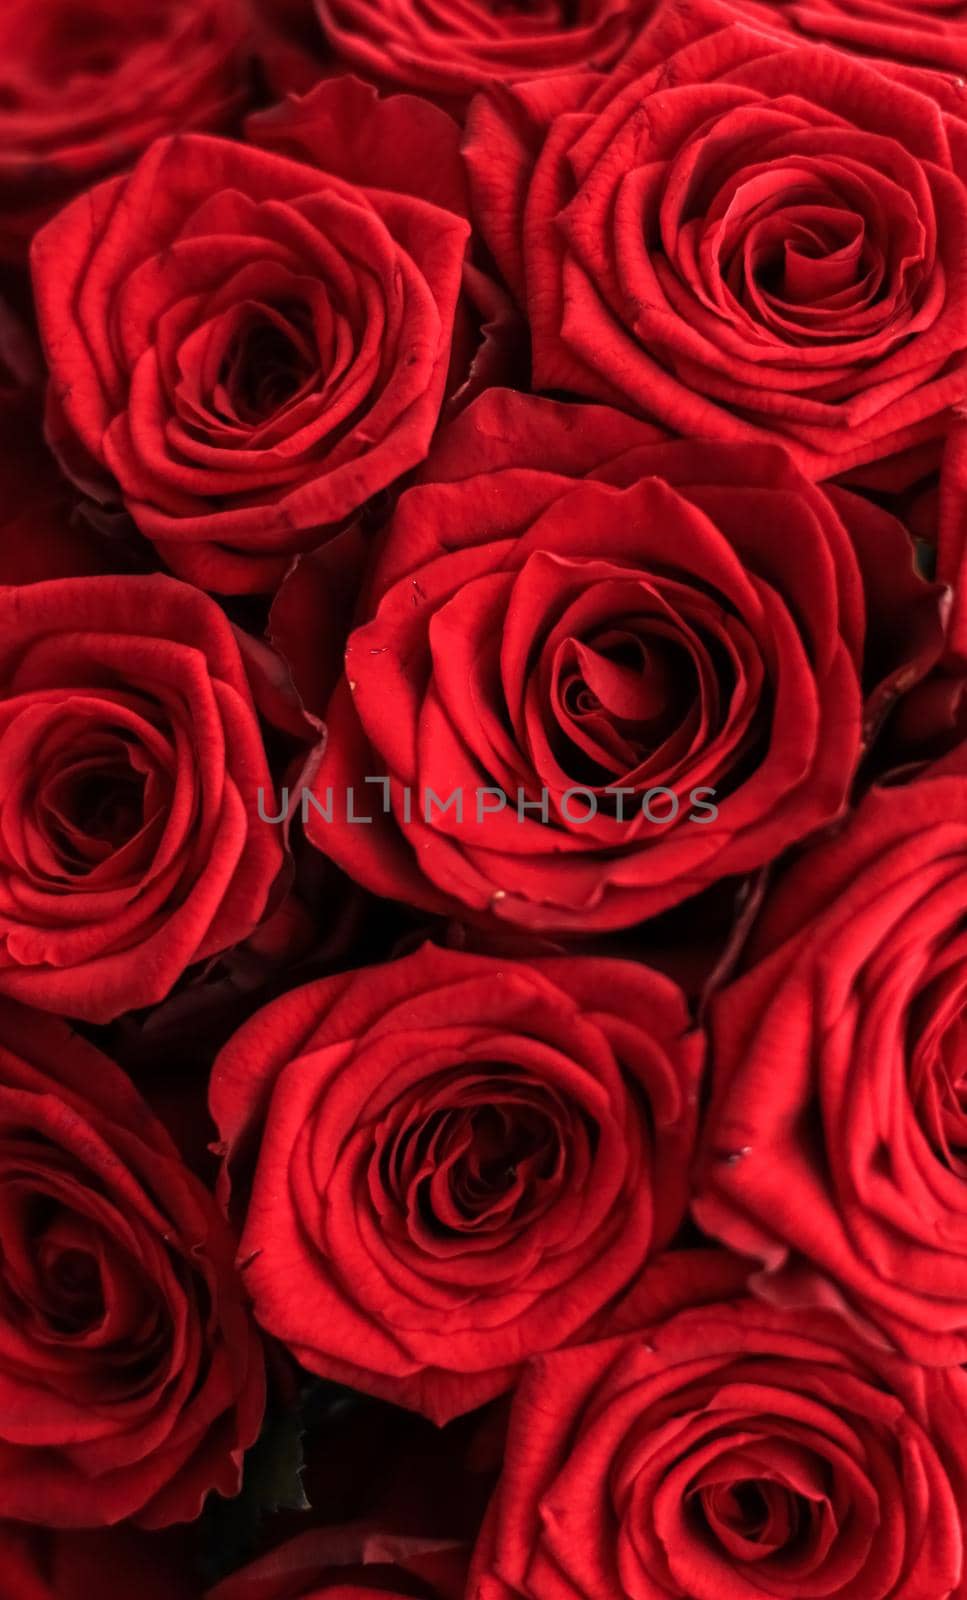 Gourgeous luxury bouquet of red roses, flowers in bloom as floral holiday background by Anneleven